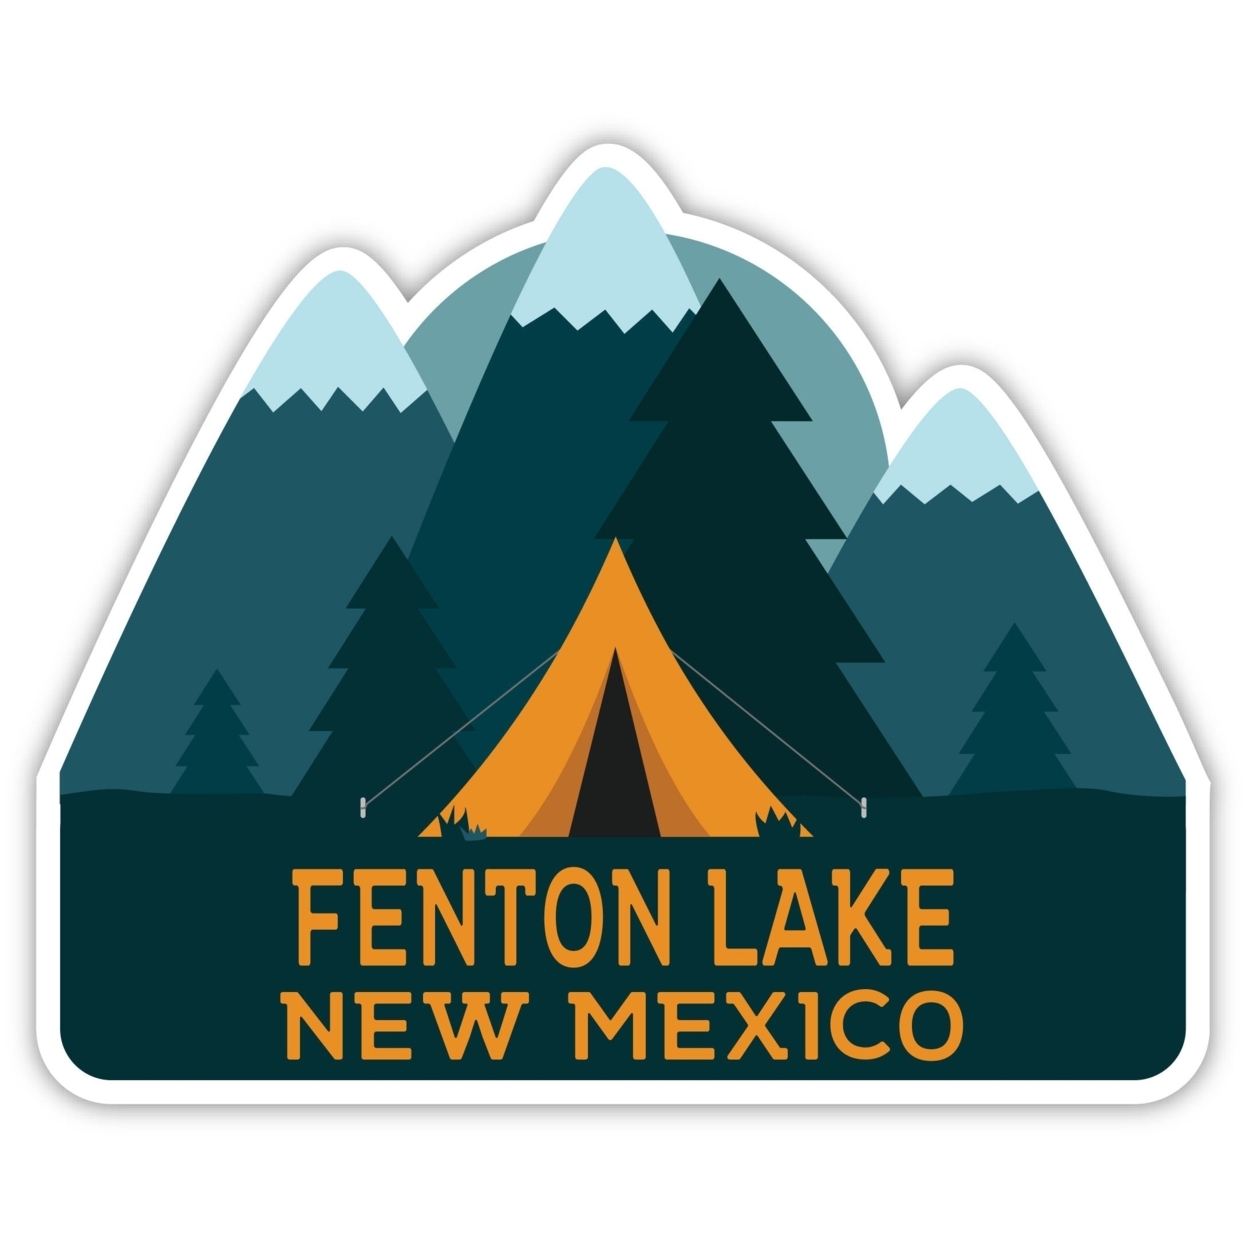 Fenton Lake New Mexico Souvenir Decorative Stickers (Choose Theme And Size) - 4-Pack, 6-Inch, Tent